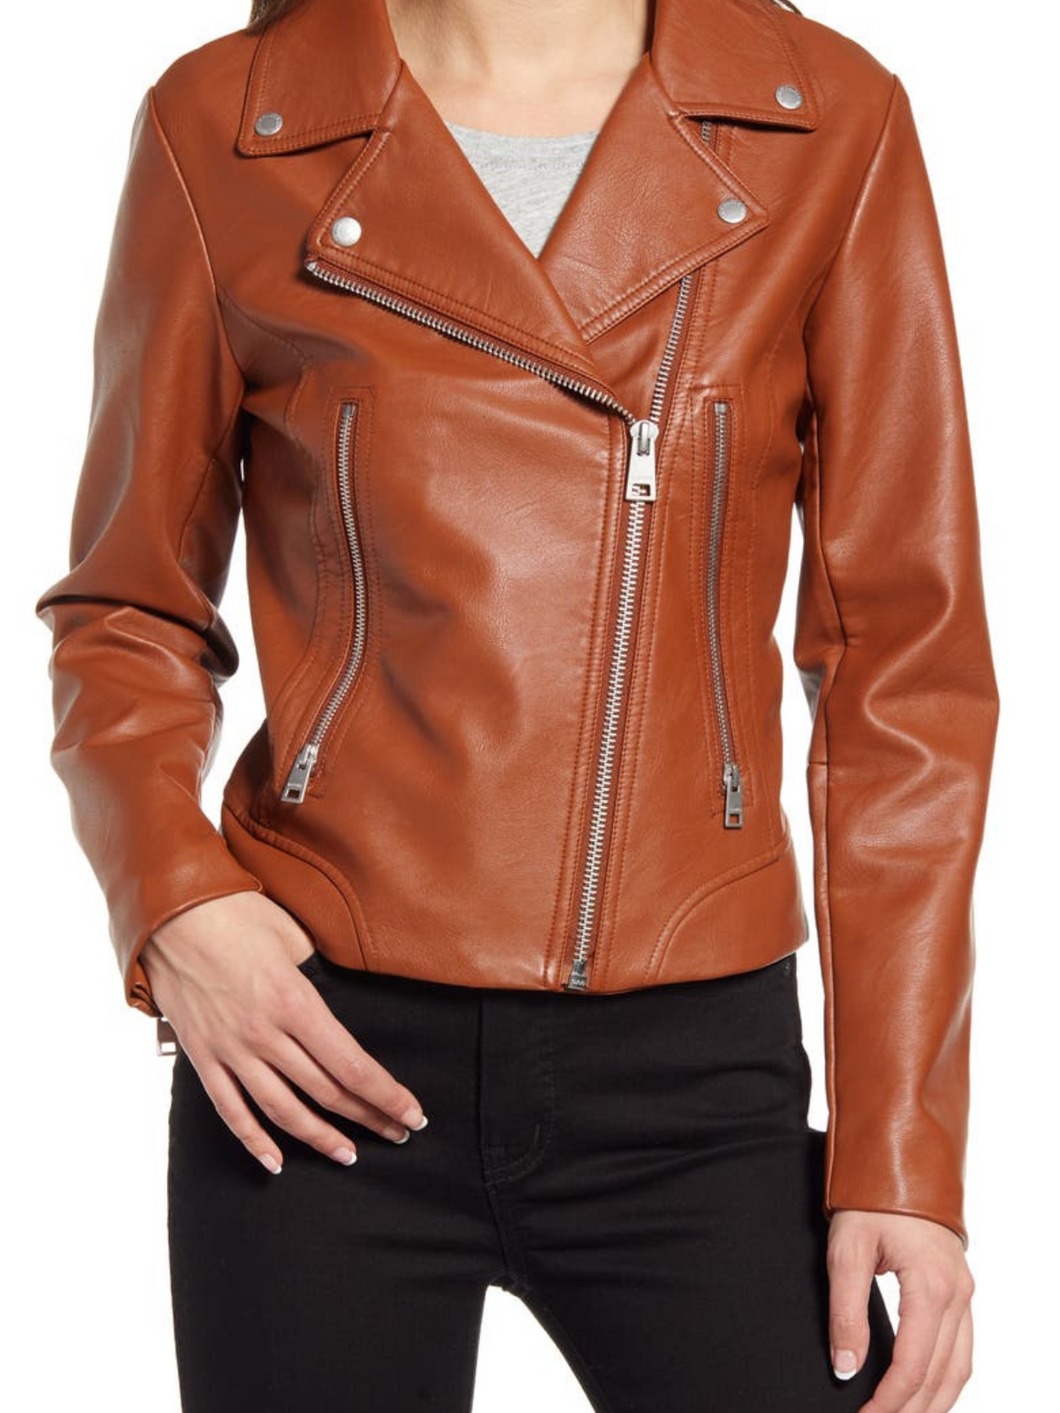 Brown Lapel Collar Leather Jacket For Women